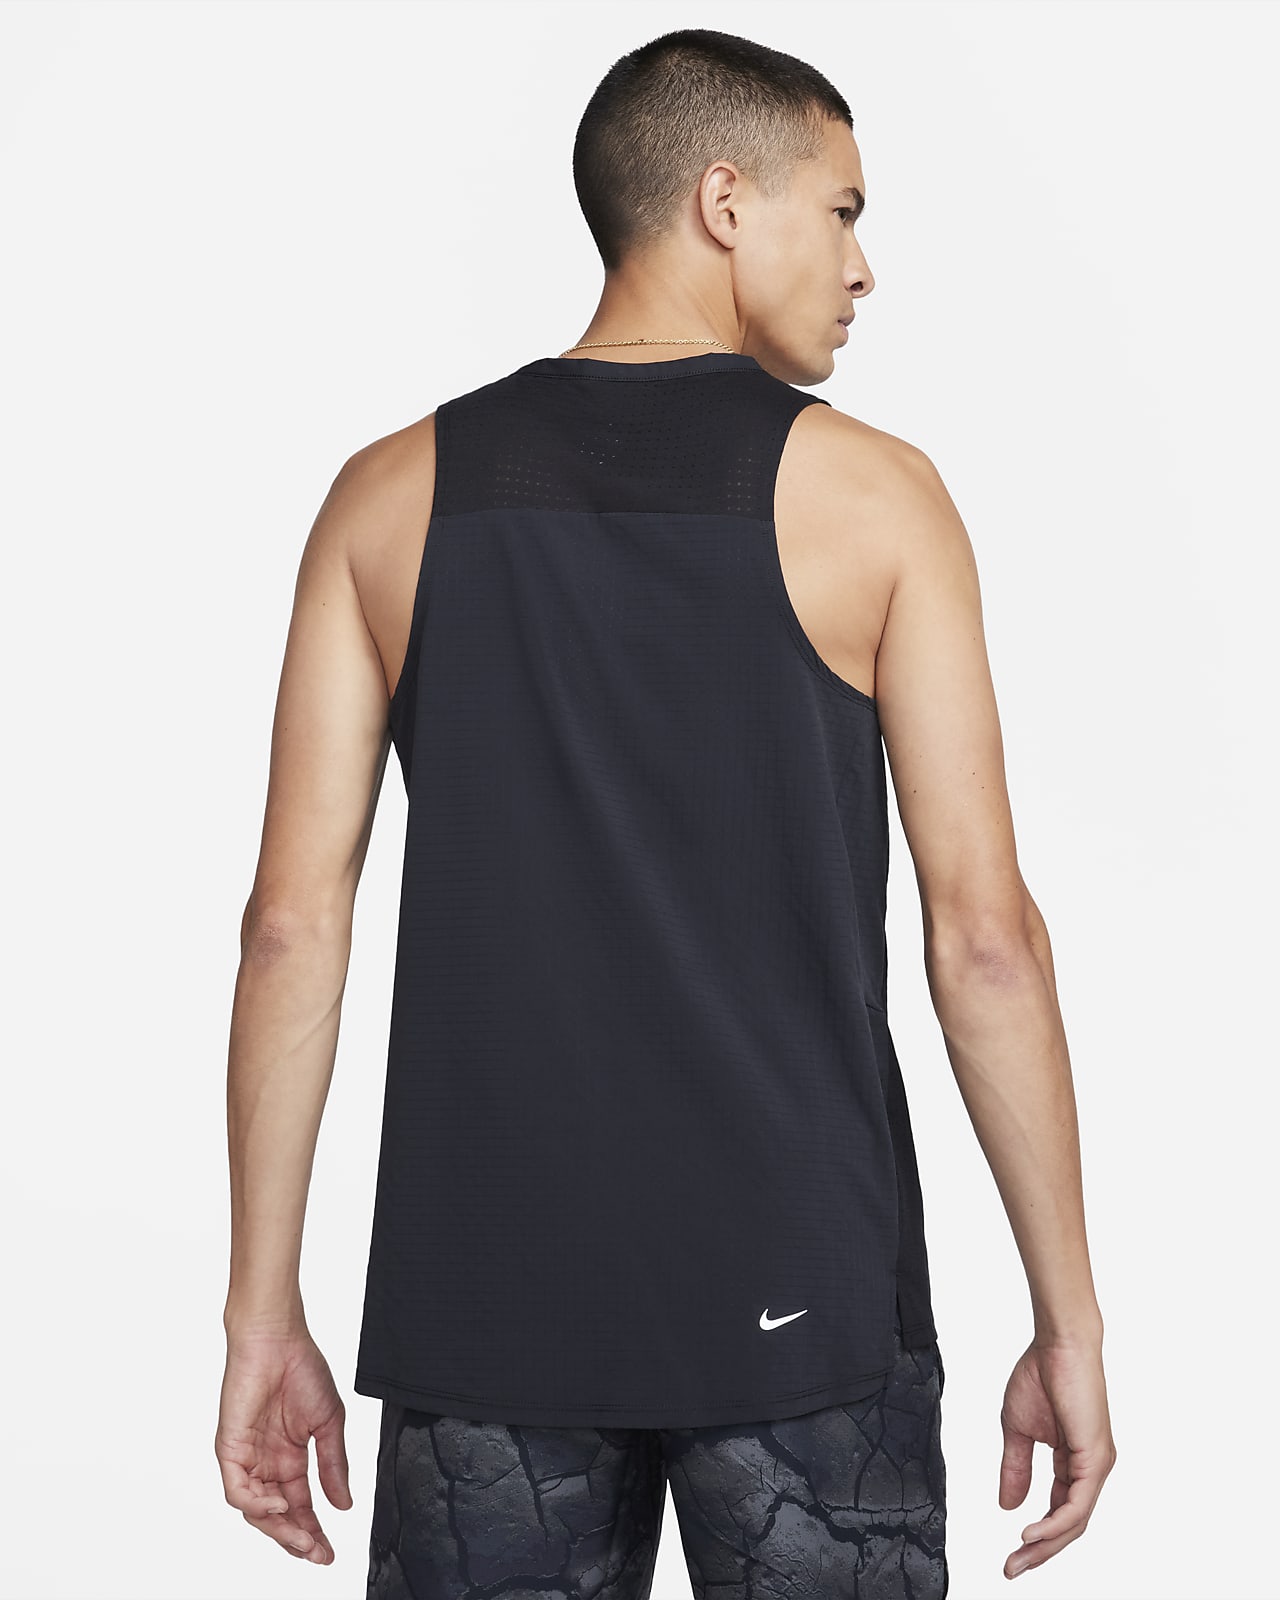 https://static.nike.com/a/images/t_PDP_1280_v1/f_auto,q_auto:eco/1dba339d-bedb-4f21-b6fb-21cc08e9b81d/dri-fit-trail-solid-tank-top-8Fd2Jh.png